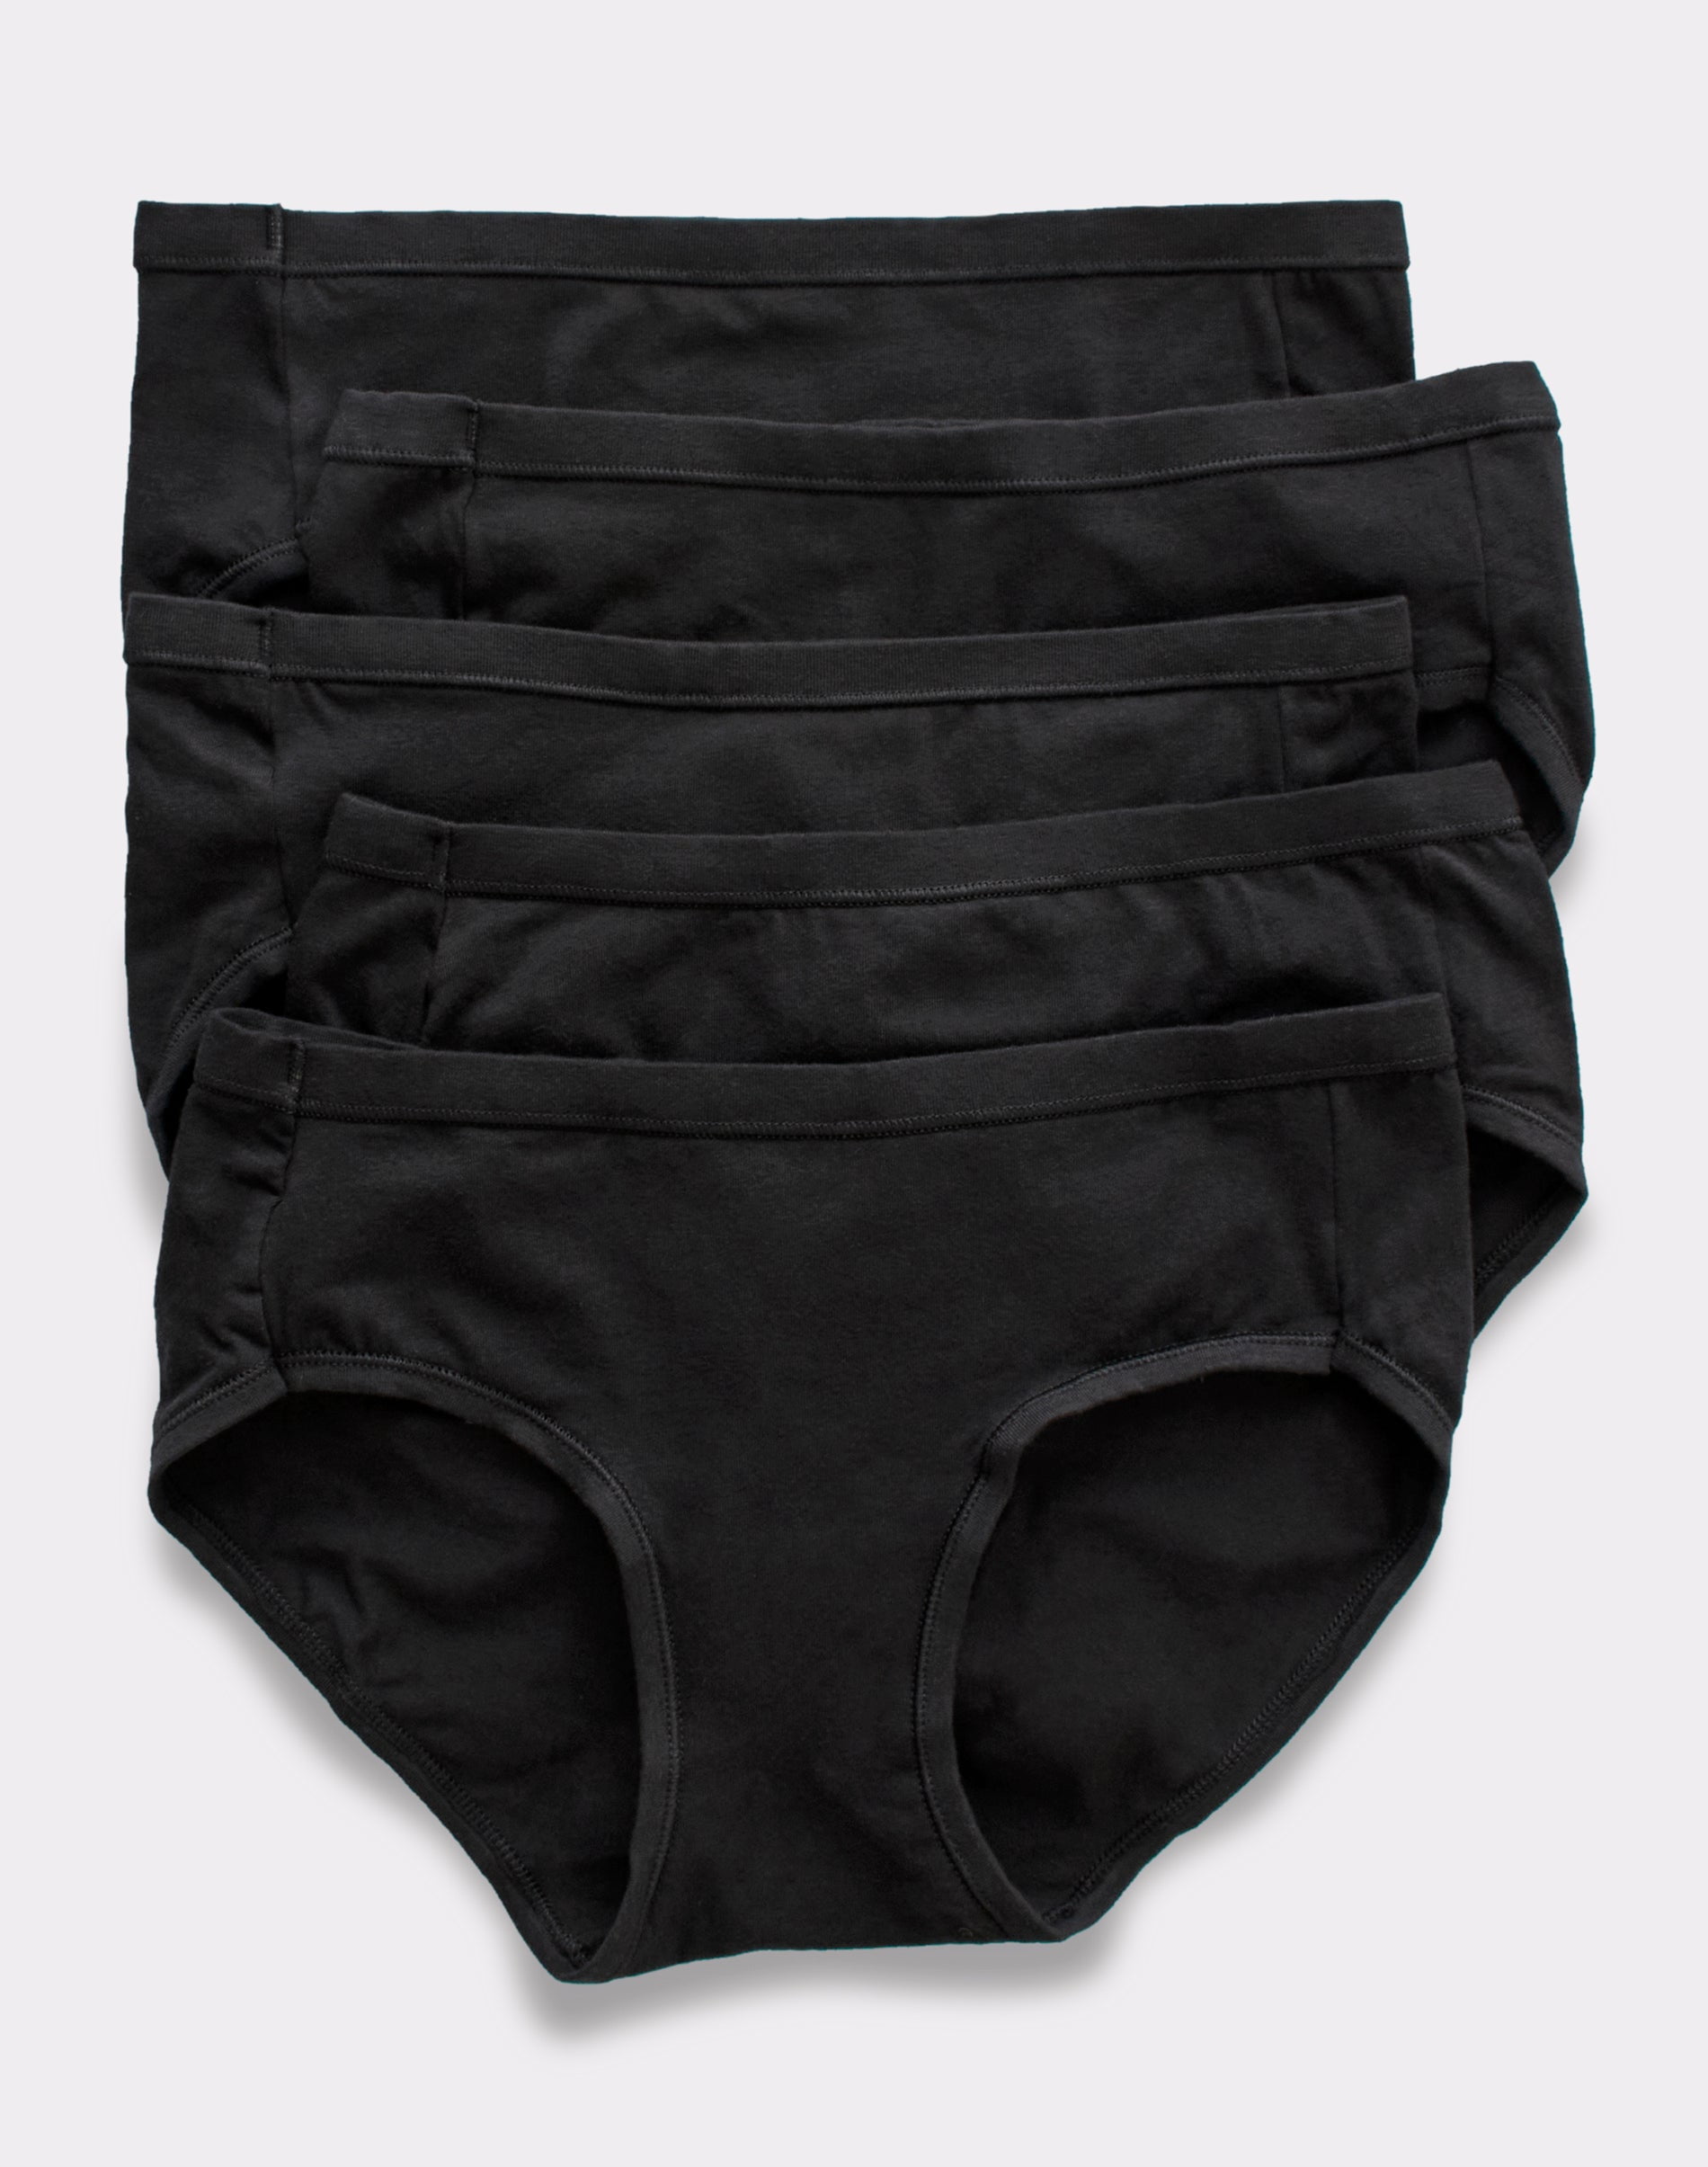 Hanes Ultimate ComfortSoft Women's Hipster Underwear, 5-Pack  Black/Black/Black/Black/Black 9 